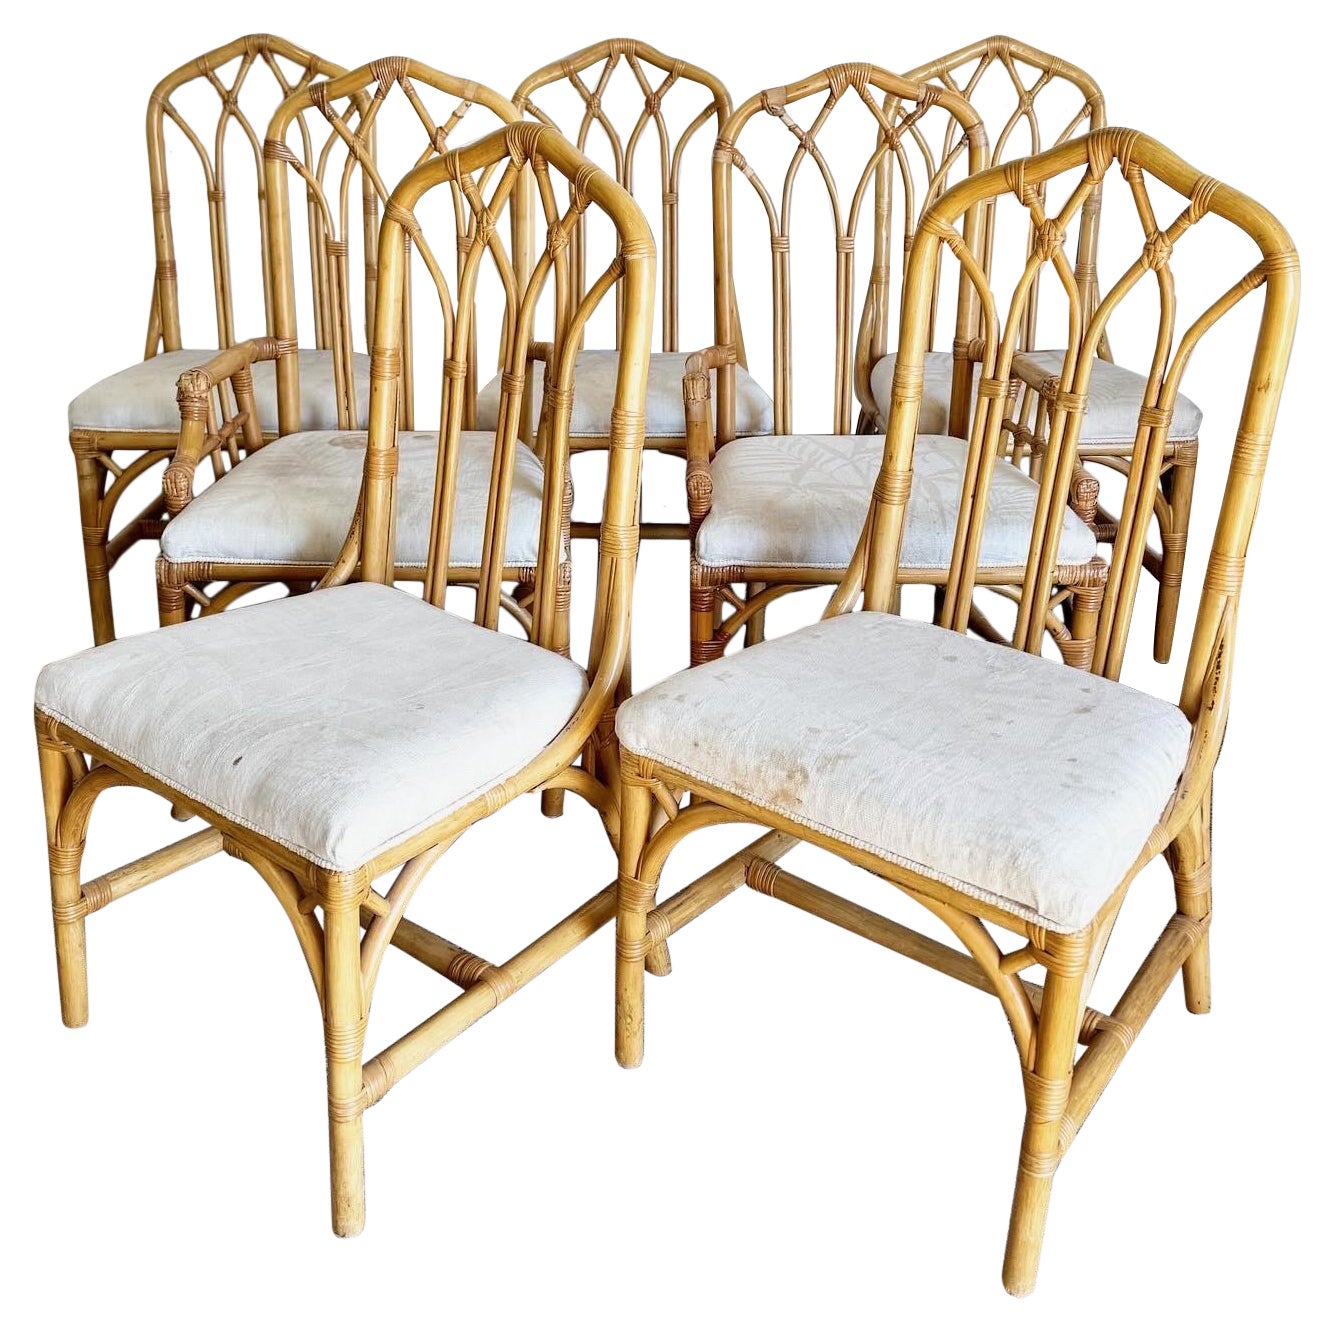 Boho Chic Bamboo Rattan Henry Link Dining Chairs - Set of 7